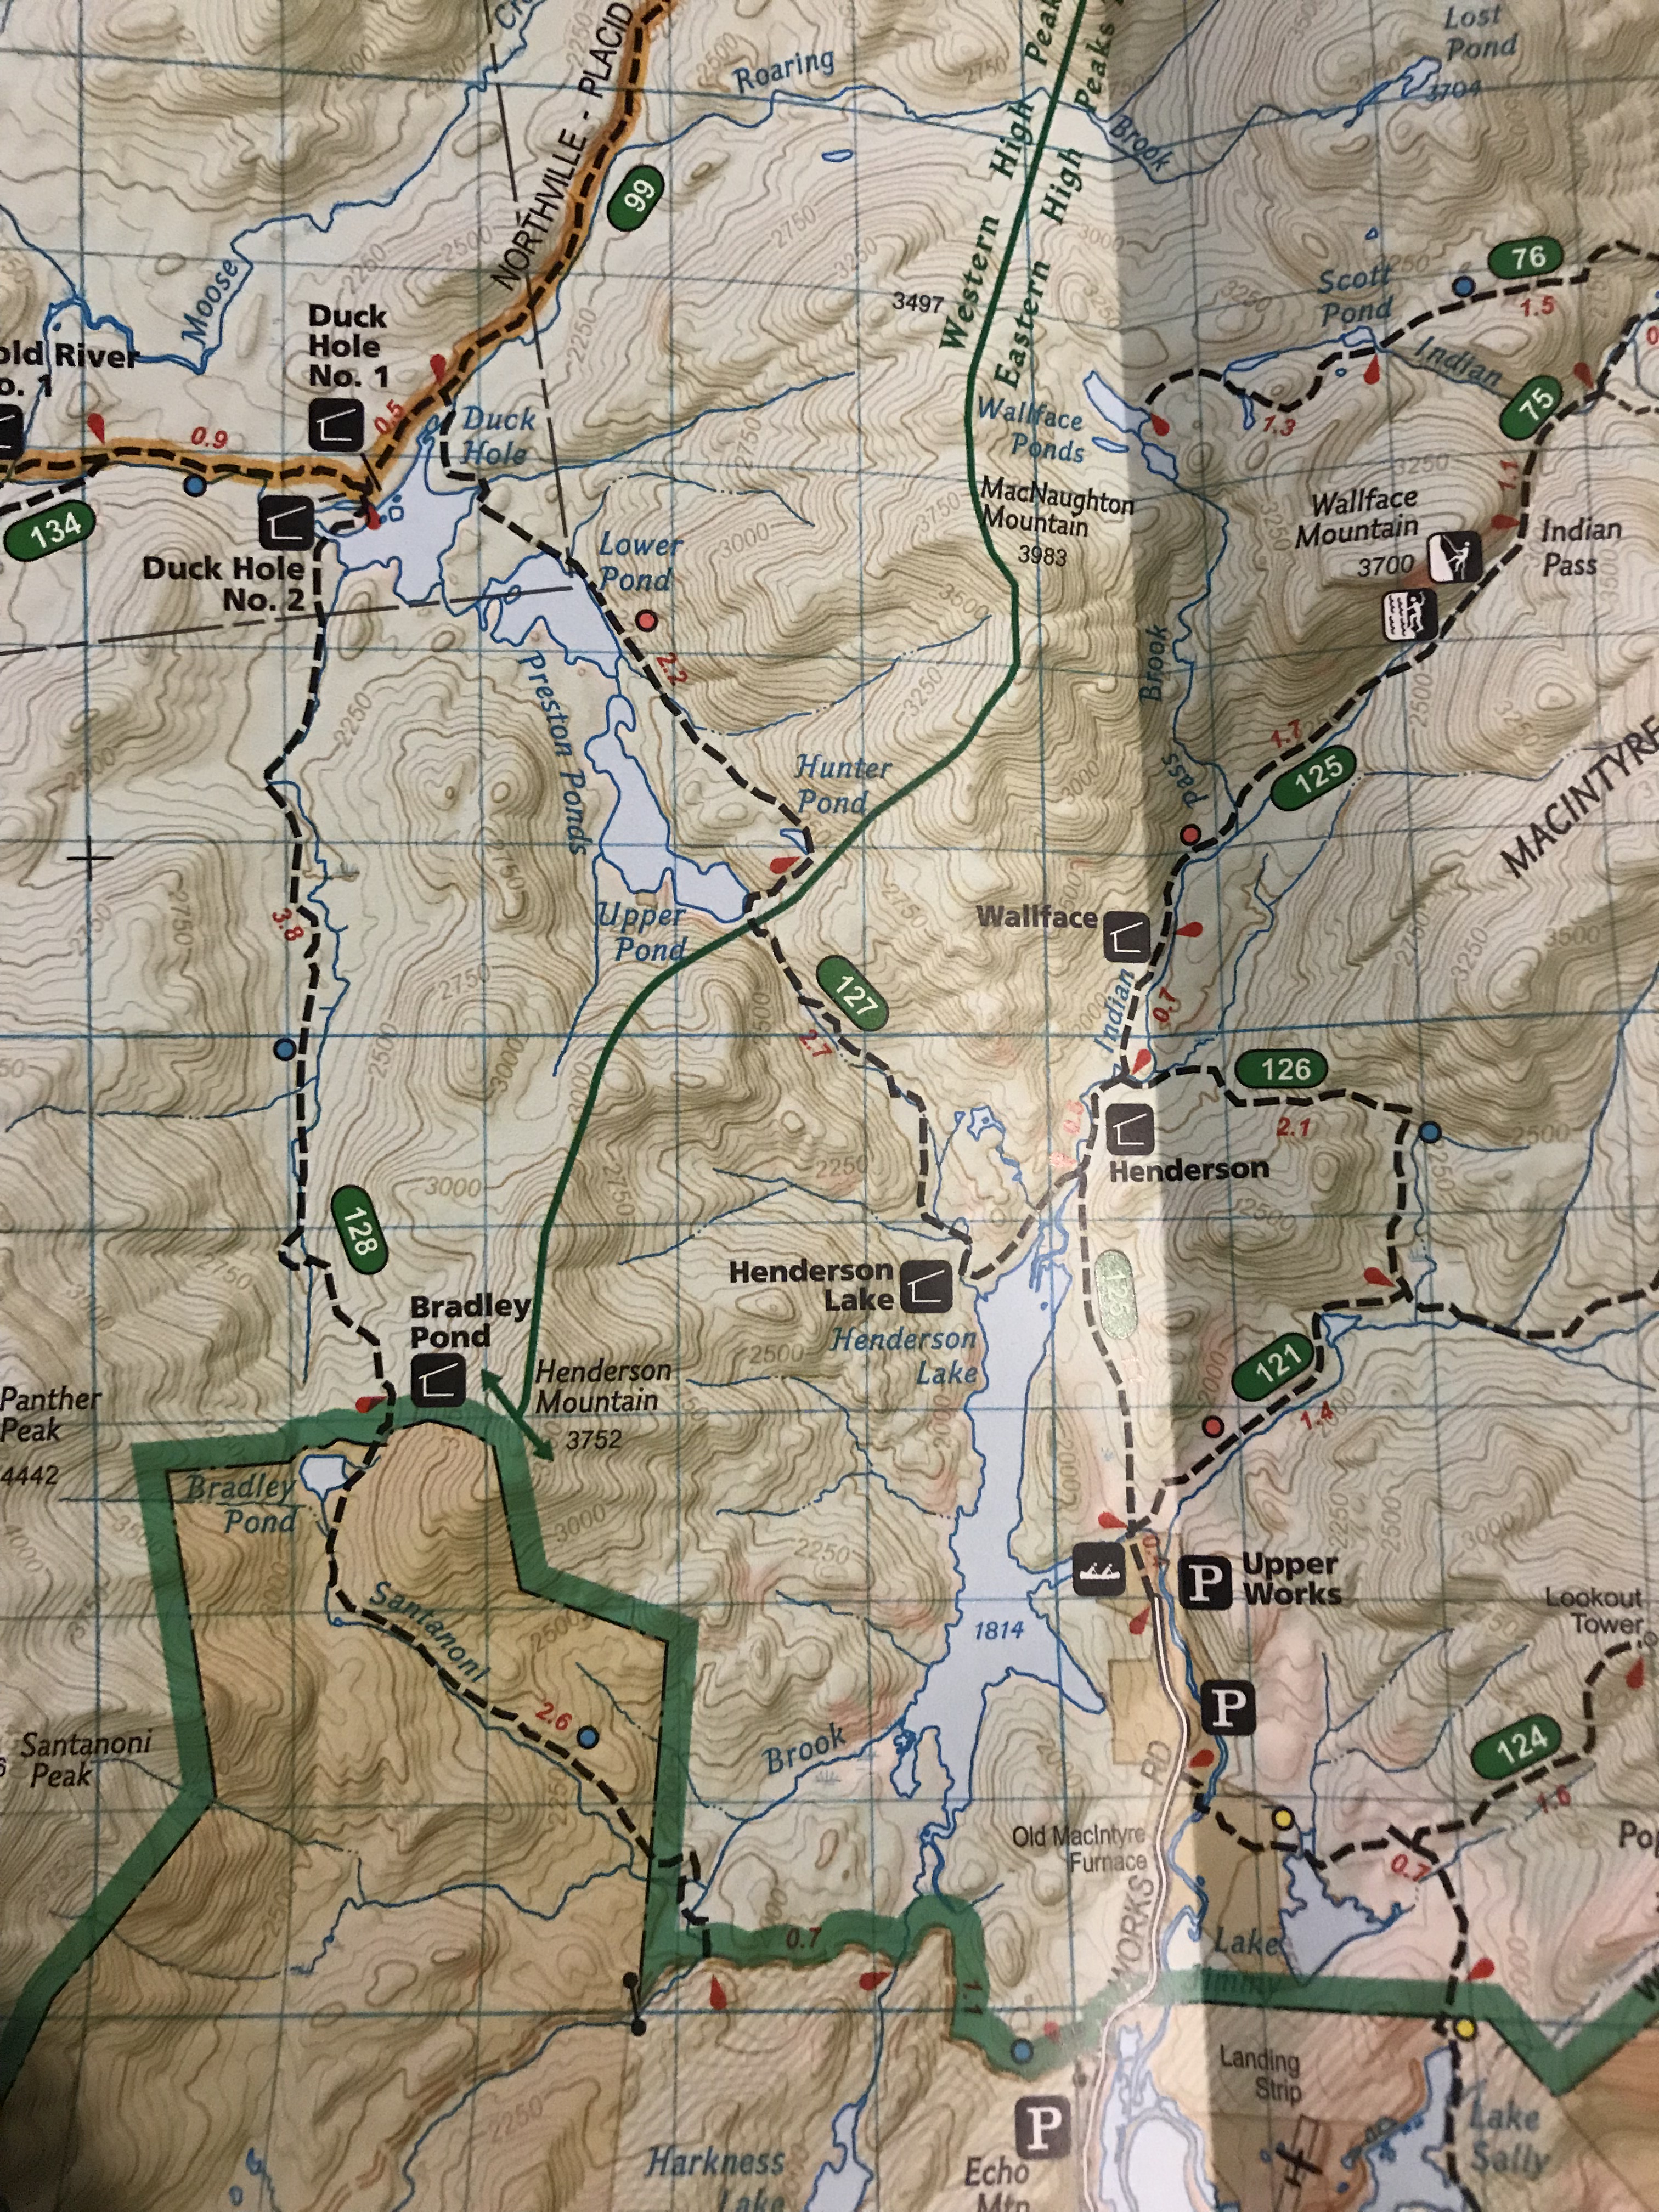 Upper Pond Trail on ADK Map